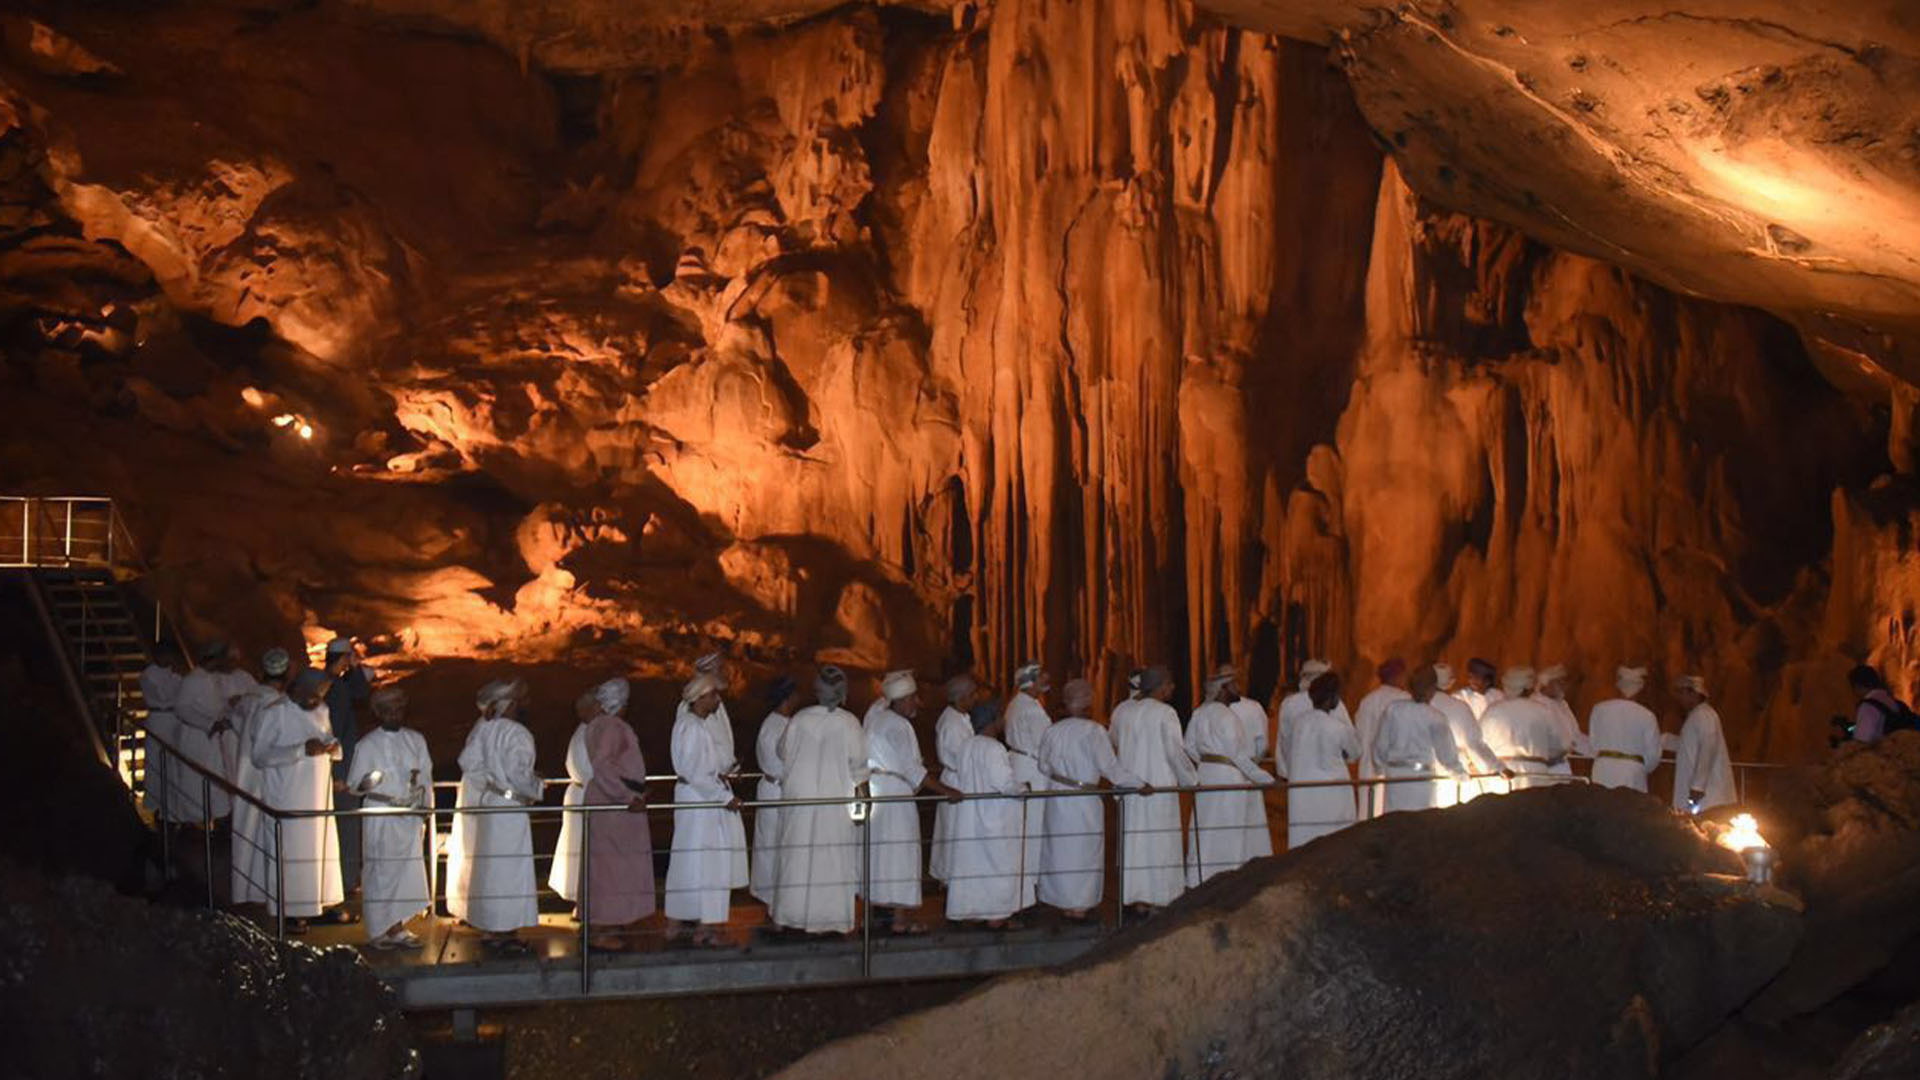 A panoramic photograph immortalizes the captivating natural marvel of Al Hoota Cave, with locals forming a queue in the background, eagerly awaiting their turn to explore this enchanting underground wonder.